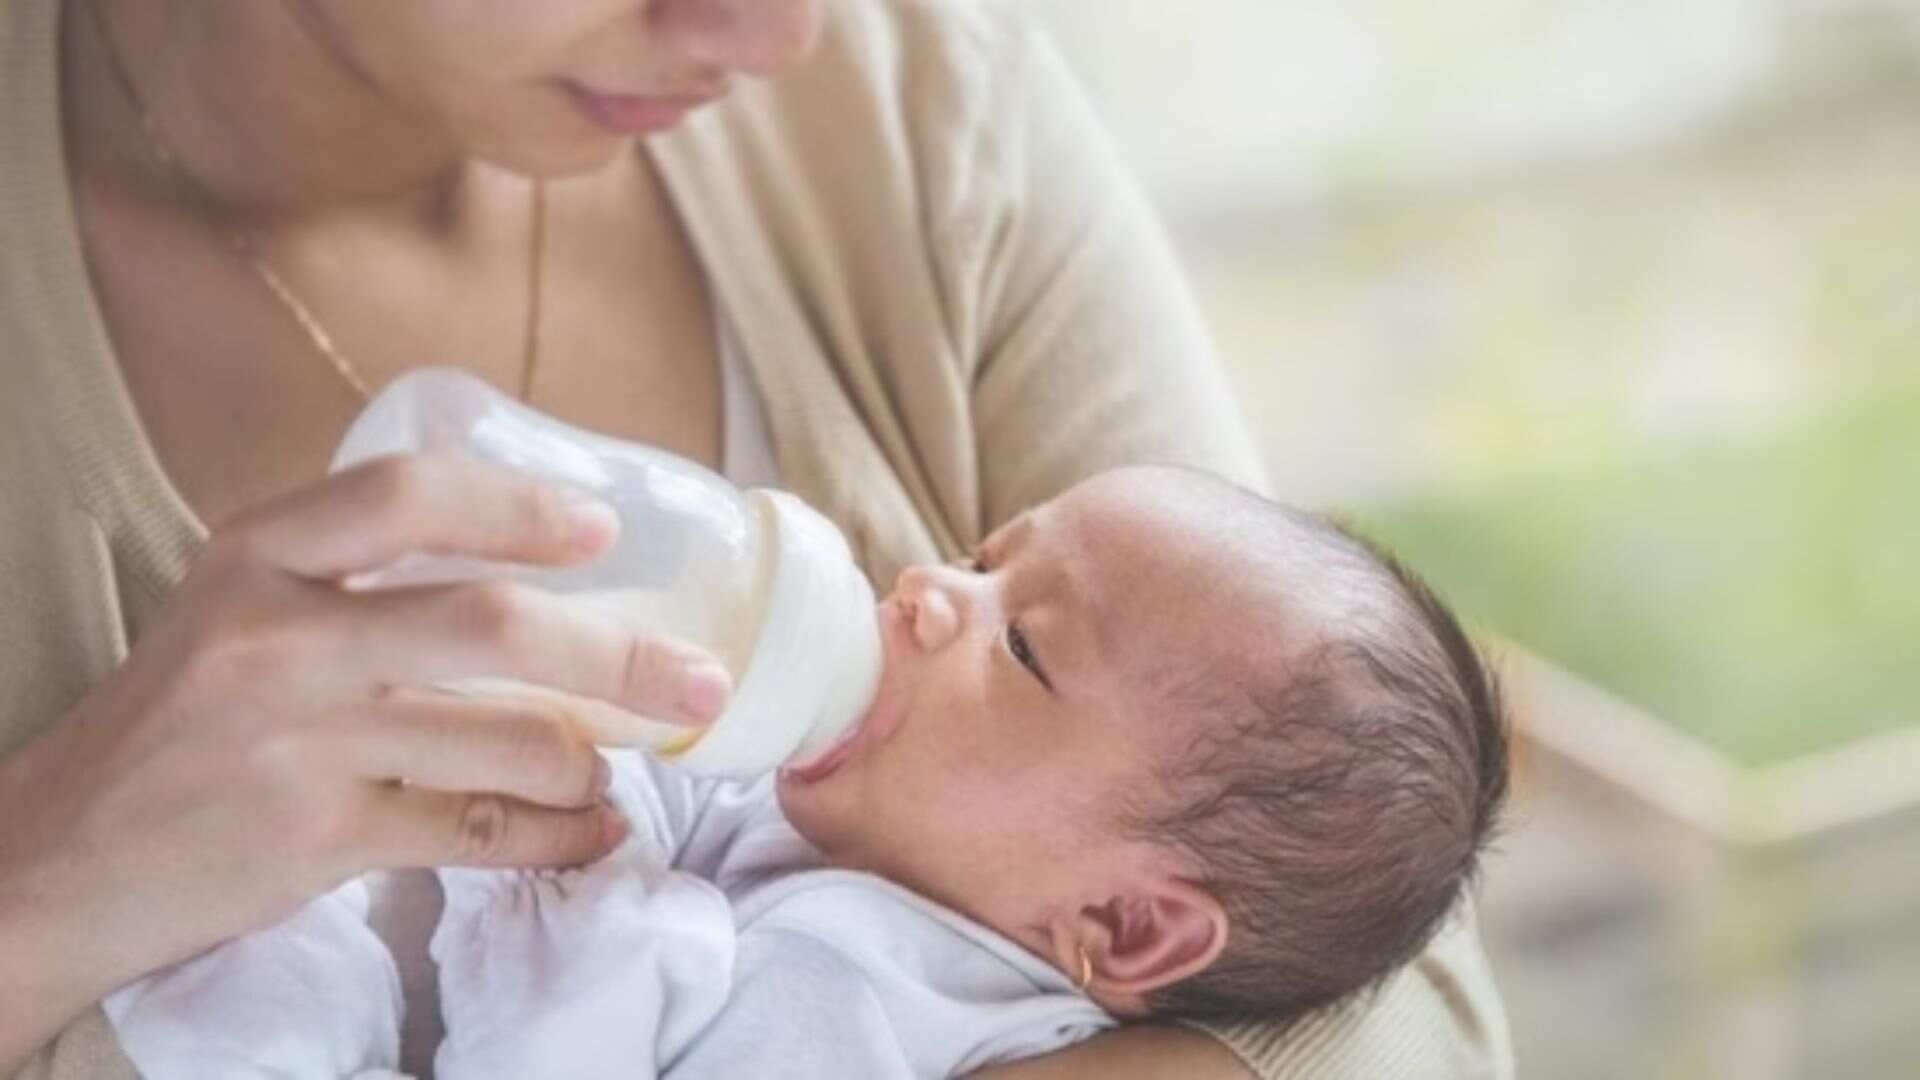 USA: Abbot Penalized $500 Million By Court For Hiding Risk Associated With Infant Formula